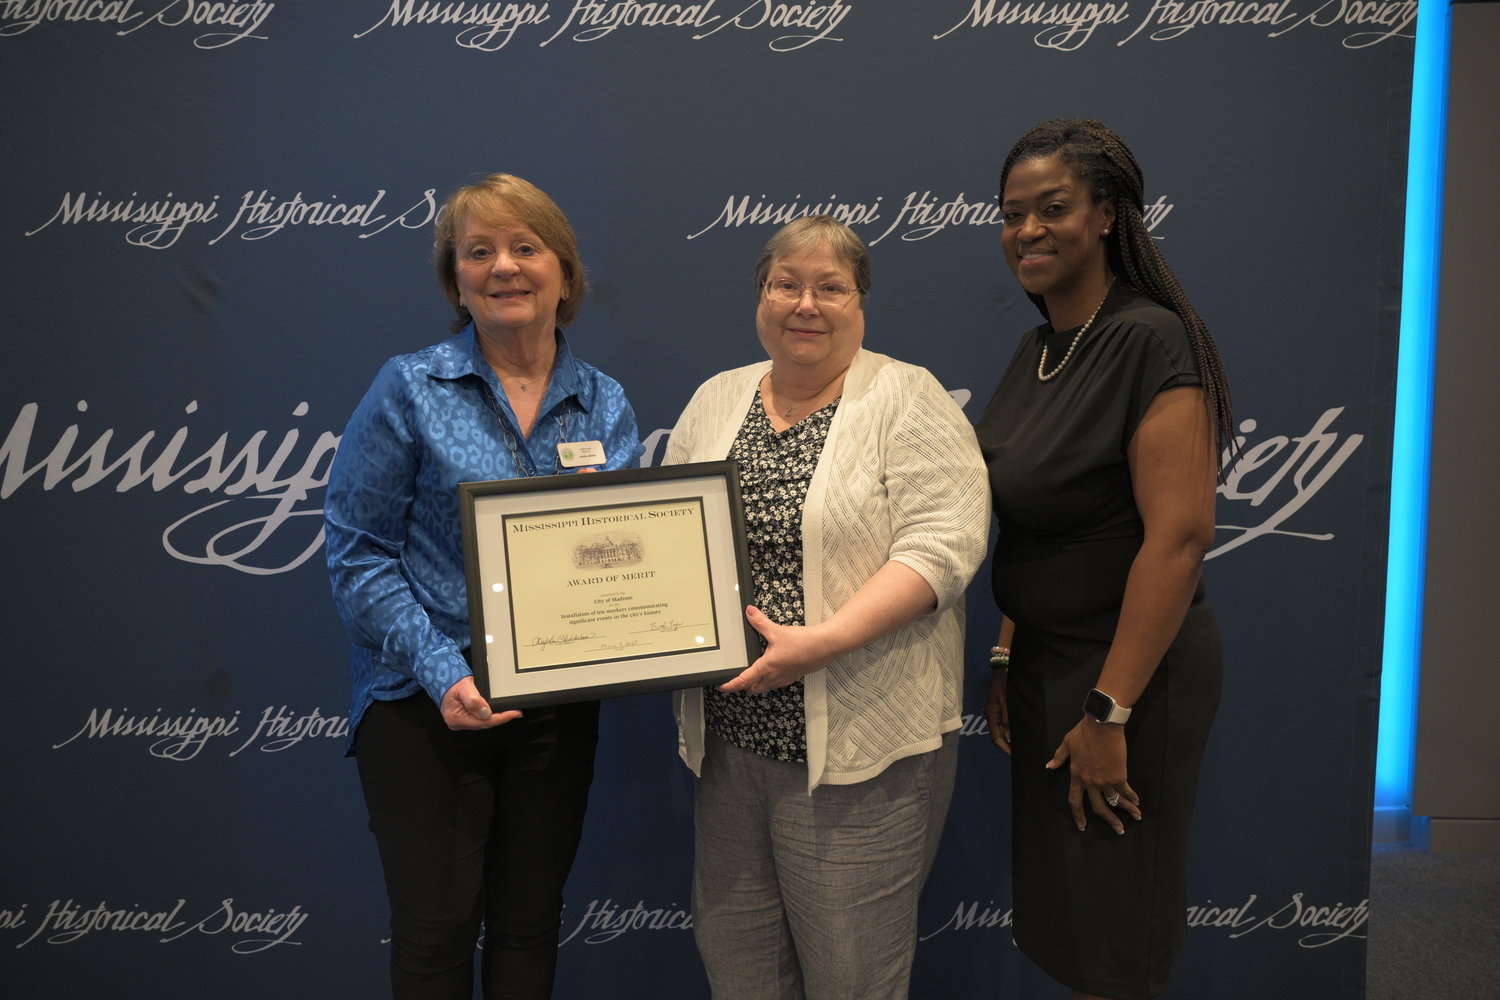 Madison Alderman Janie Jarvis, left, and Lucy Weber, project manager, accept the Award of Merit from Daphne Chamberlain, president of the Mississippi Historical Society, during the organization’s awards luncheon on March 3.